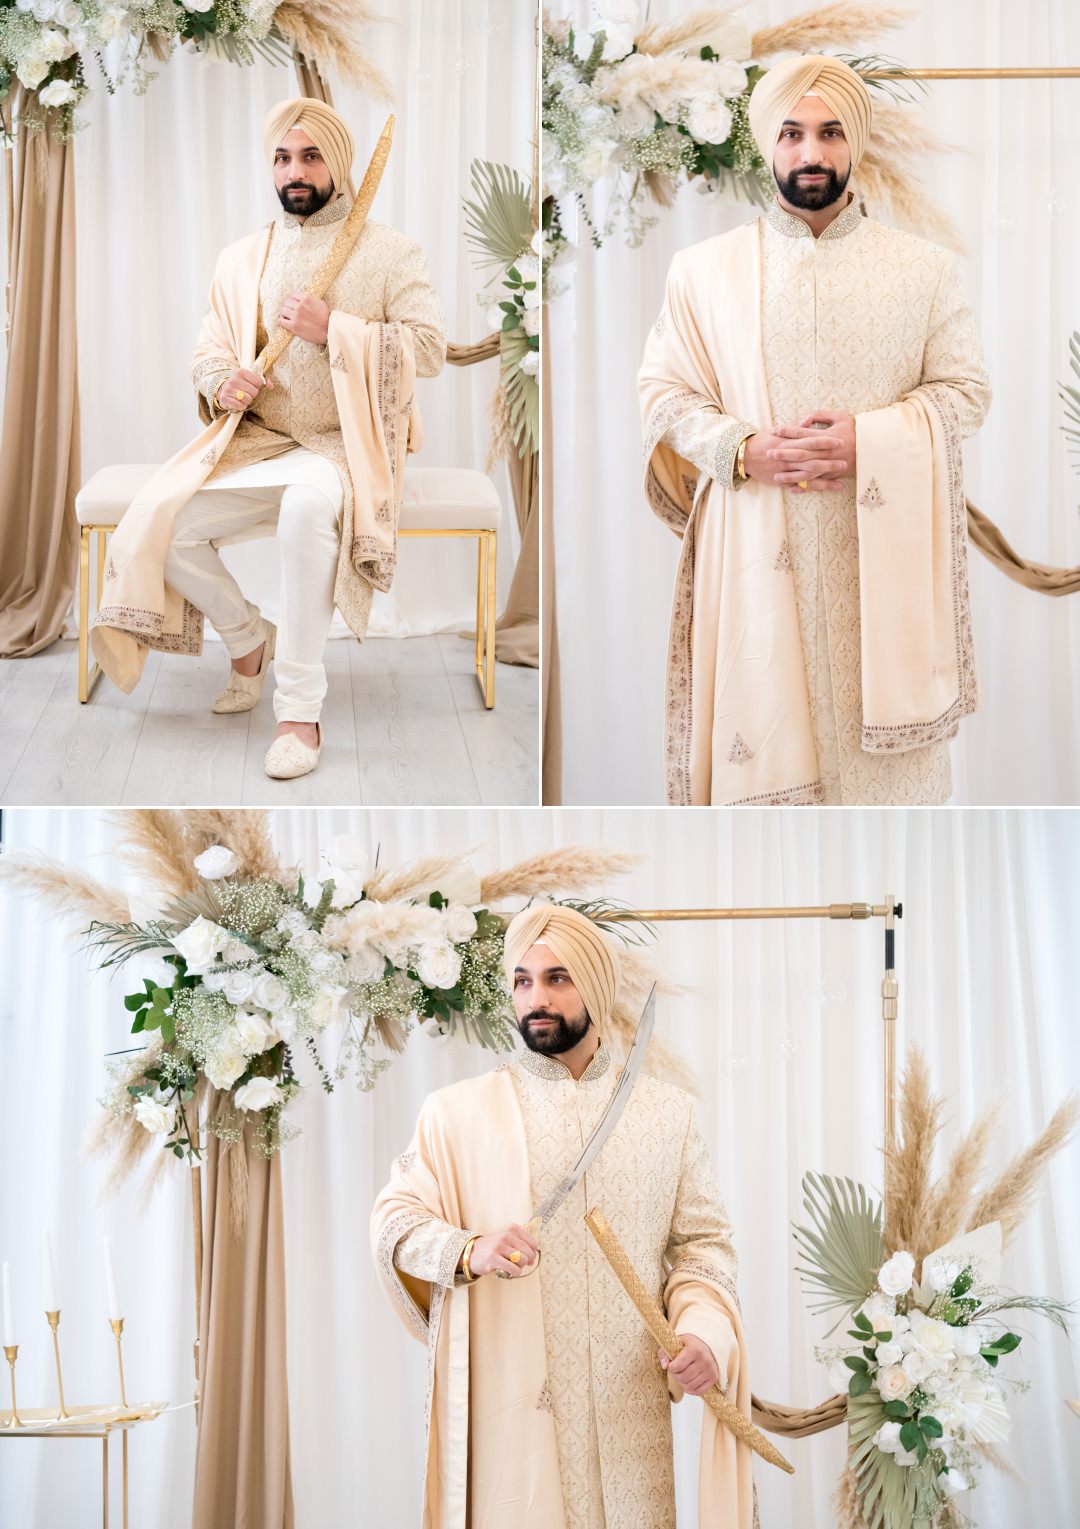 Handsome Sikh groom also dressed fabulously 